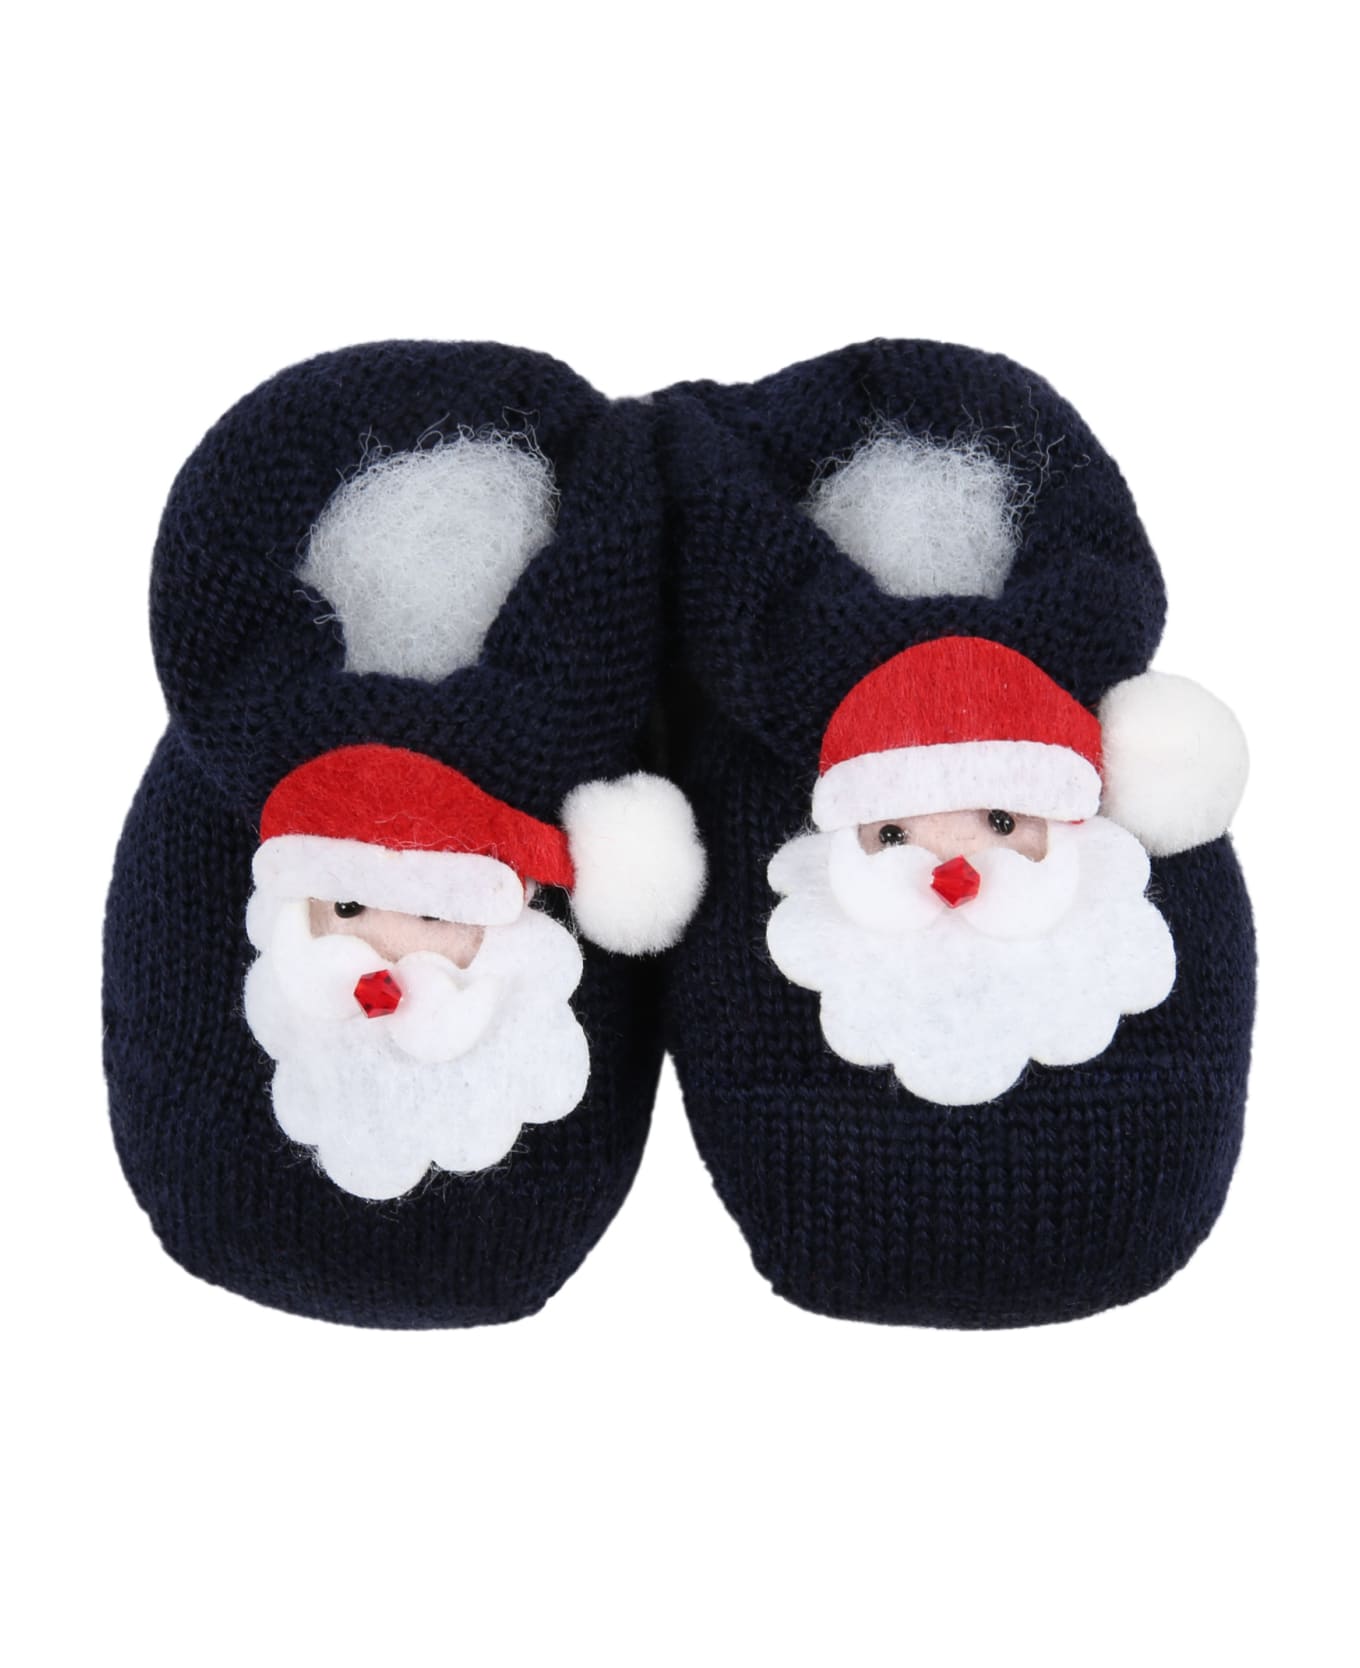 Story Loris Blue Baby-bootee For Babies With Santa Claus - Blue